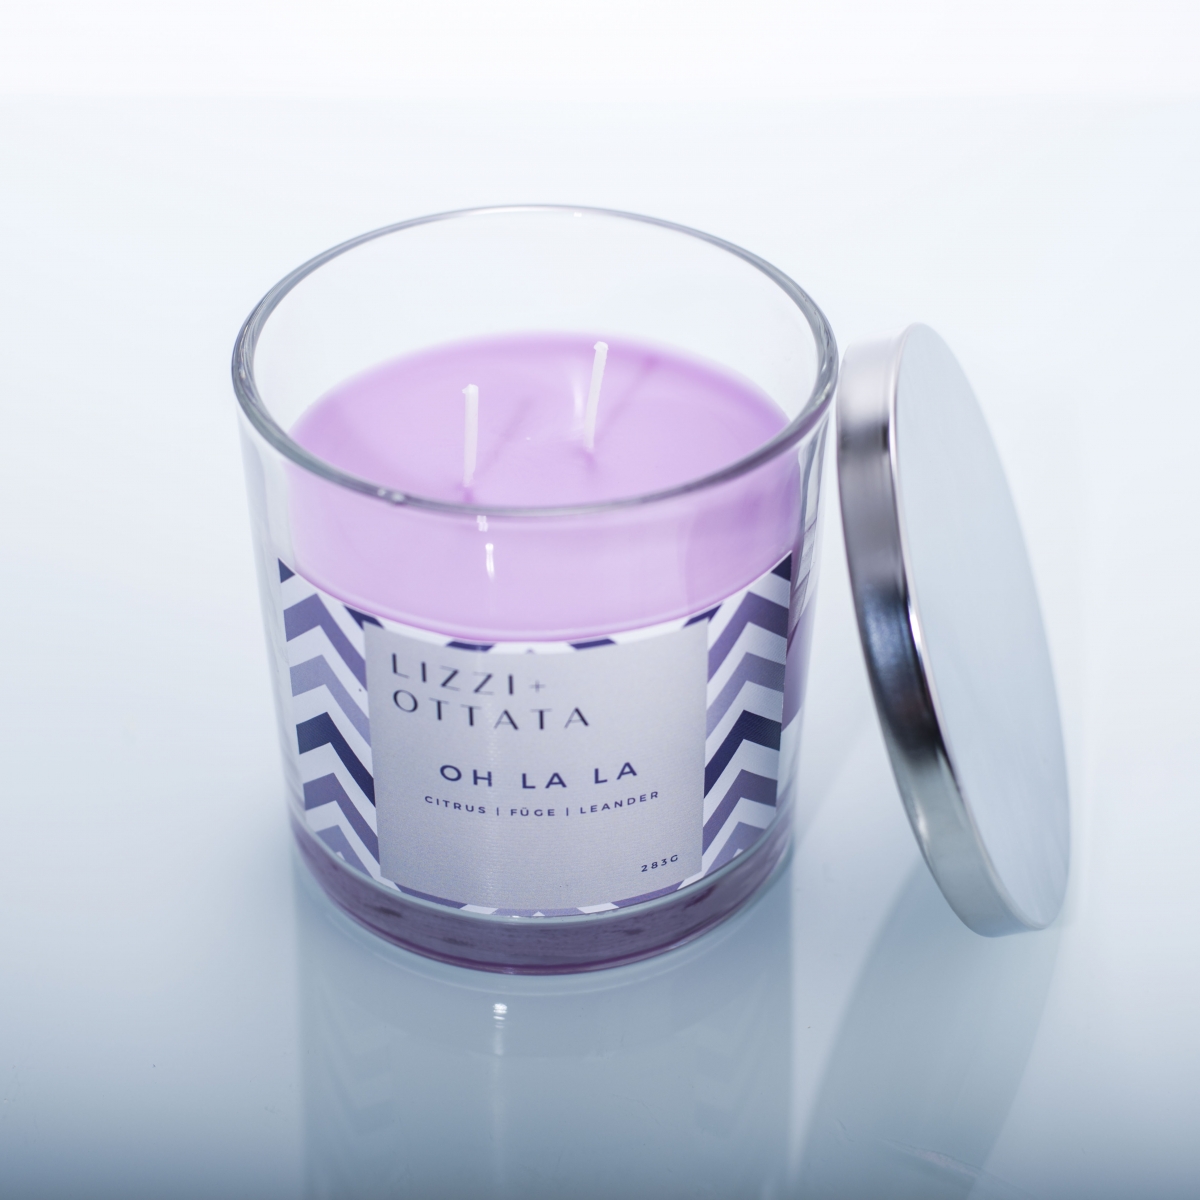 Best Soy Candles -Essential Oils  ,Dior Perfume, Crystal Glass Jar ,Silver Lid ,2 Wicks ,China Factory ,Price-HOWCANDLE-Candles,Scented Candles,Aromatherapy Candles,Soy Candles,Vegan Candles,Jar Candles,Pillar Candles,Candle Gift Sets,Essential Oils,Reed Diffuser,Candle Holder,